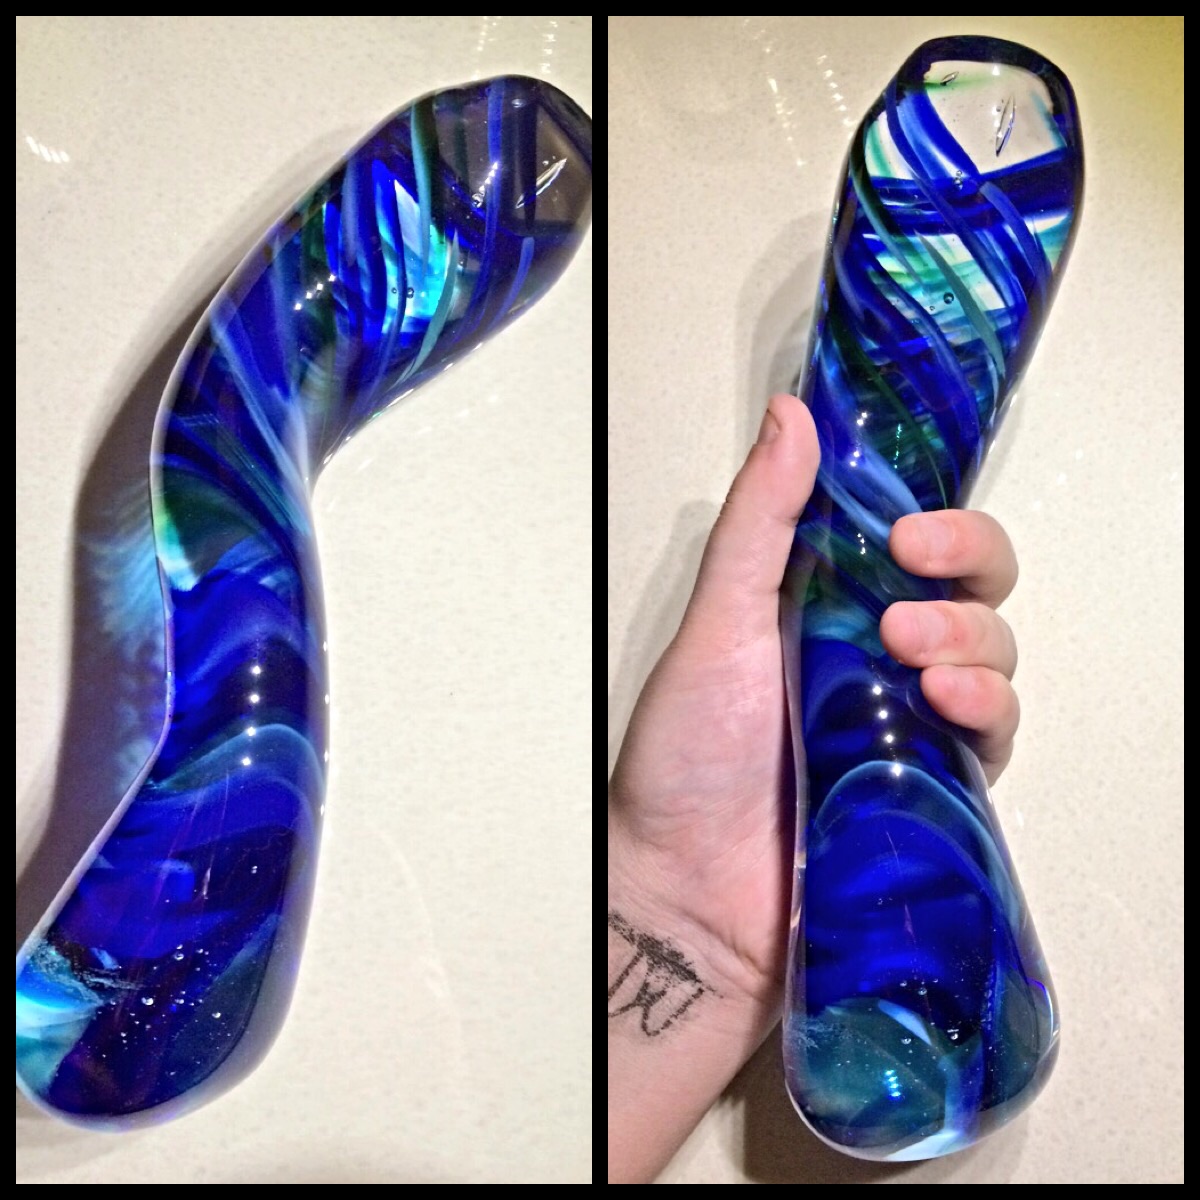 homemade glass adult toys